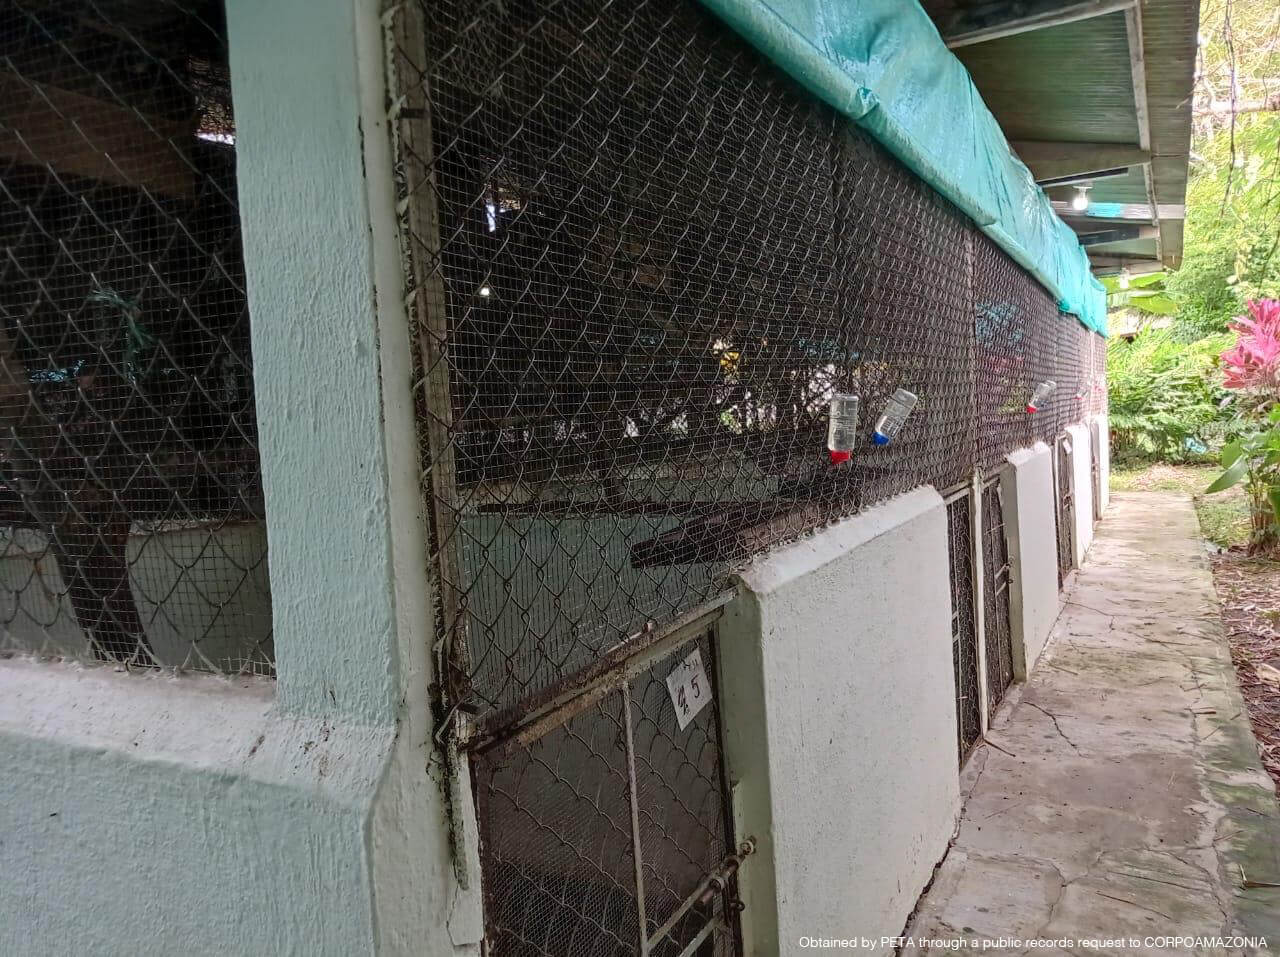 A photo showing outdoor cages with rusty metal mesh